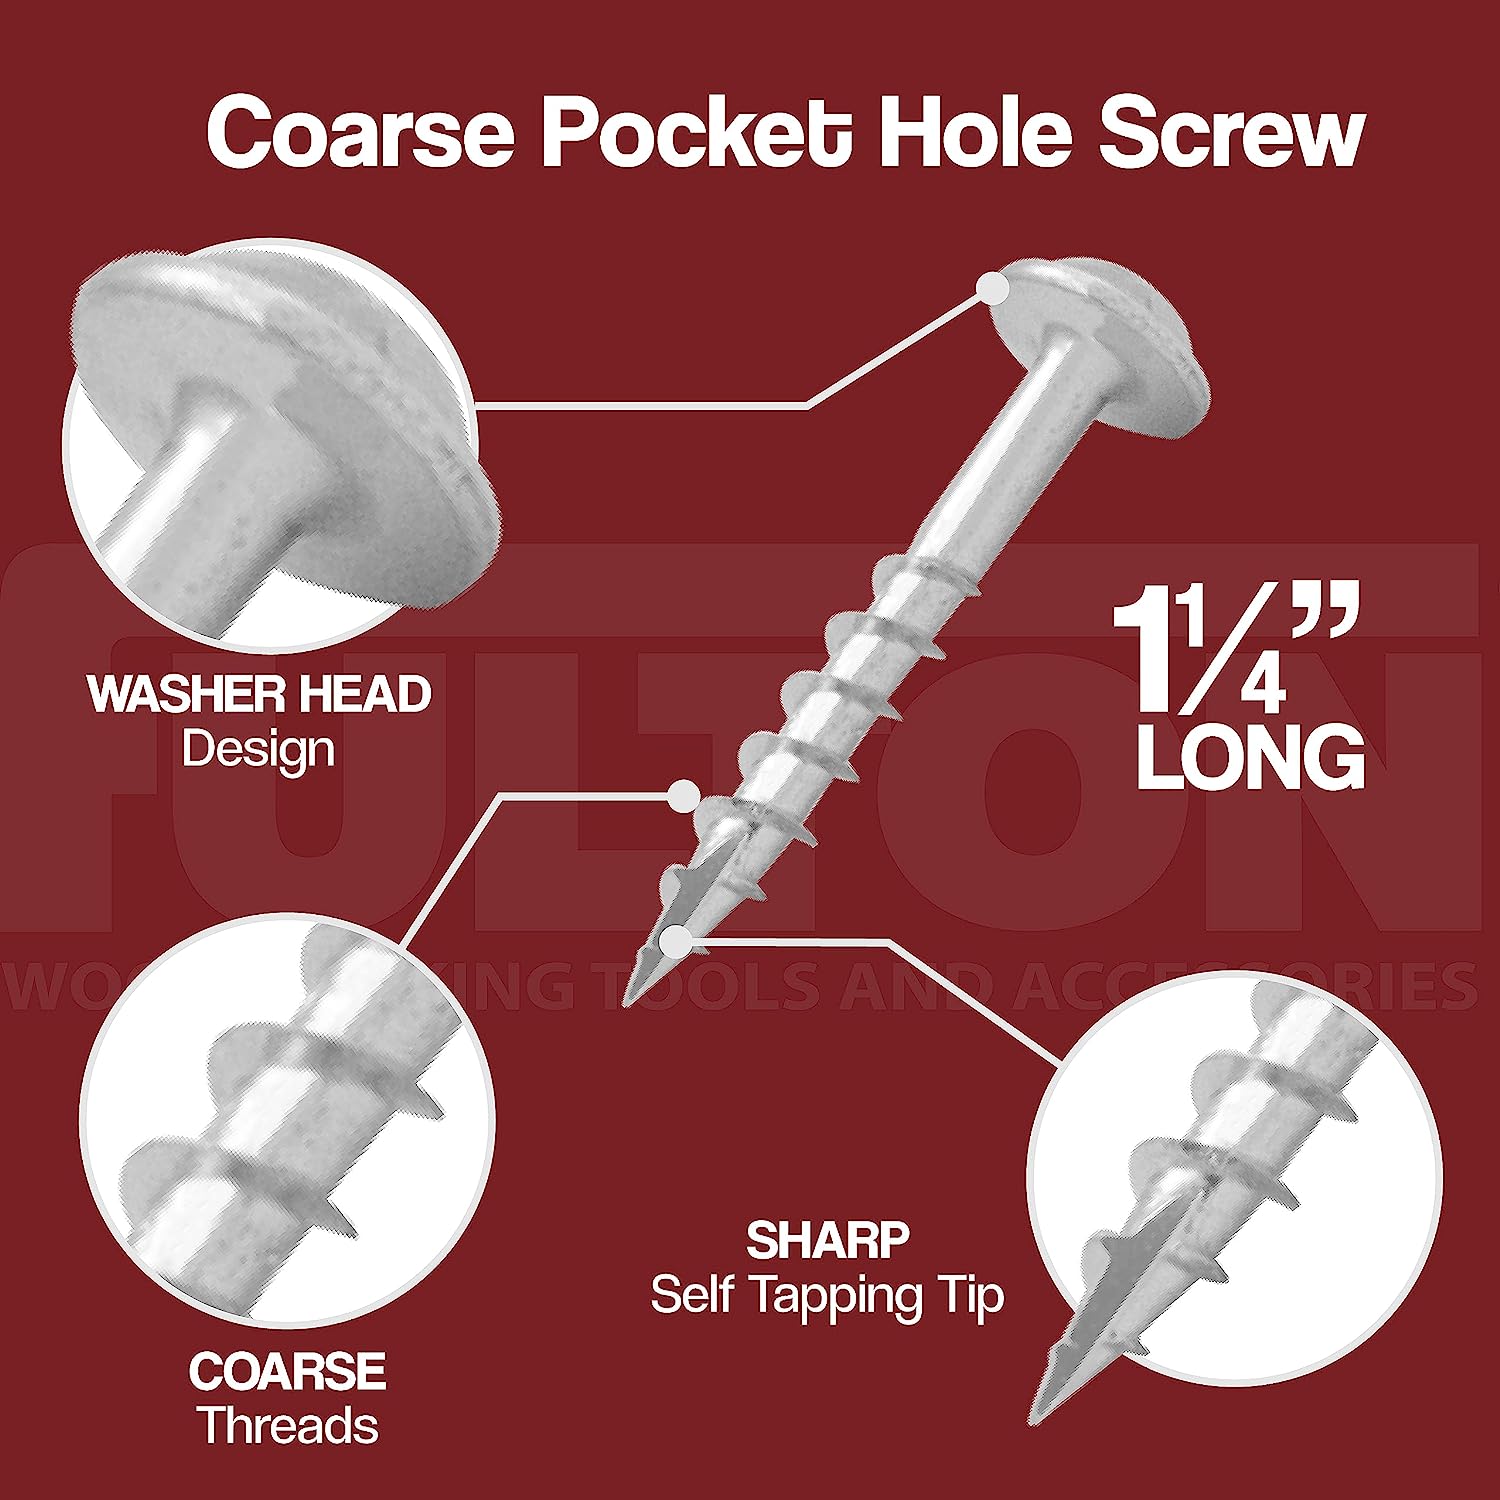 Use the right pocket-screw thread type for the material